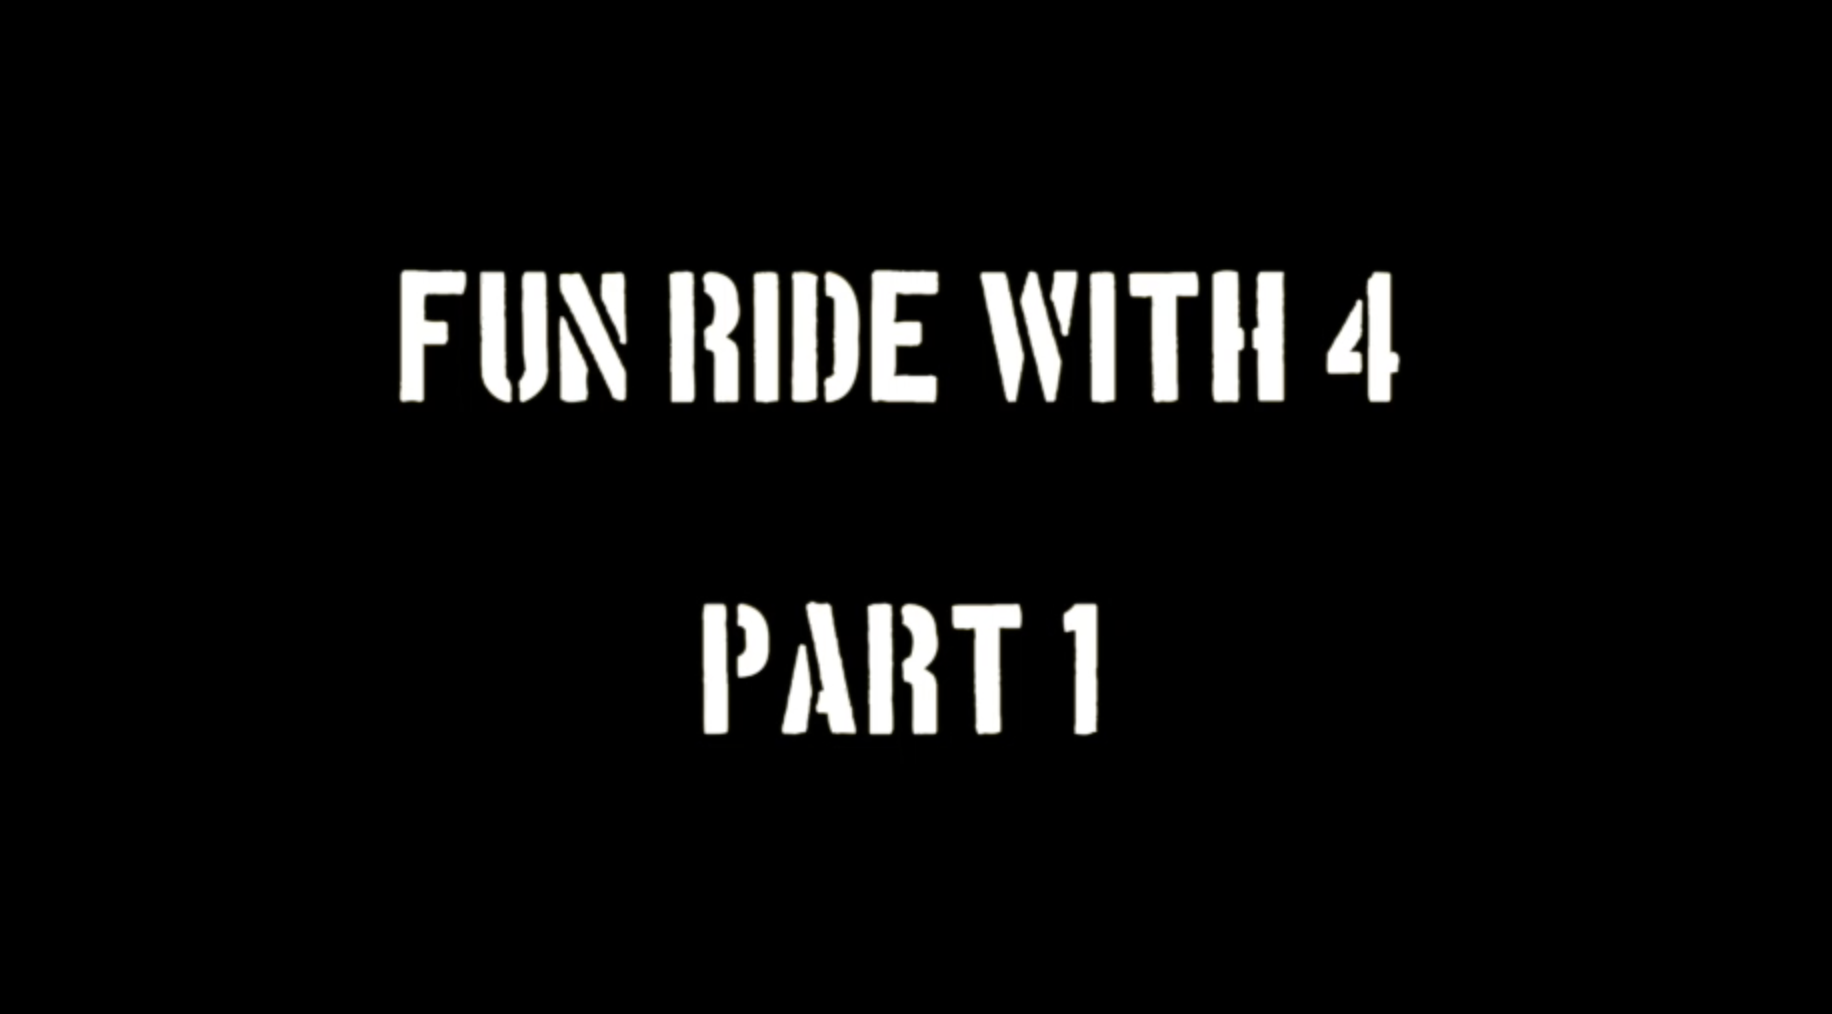 FUN RIDE with 4 part1